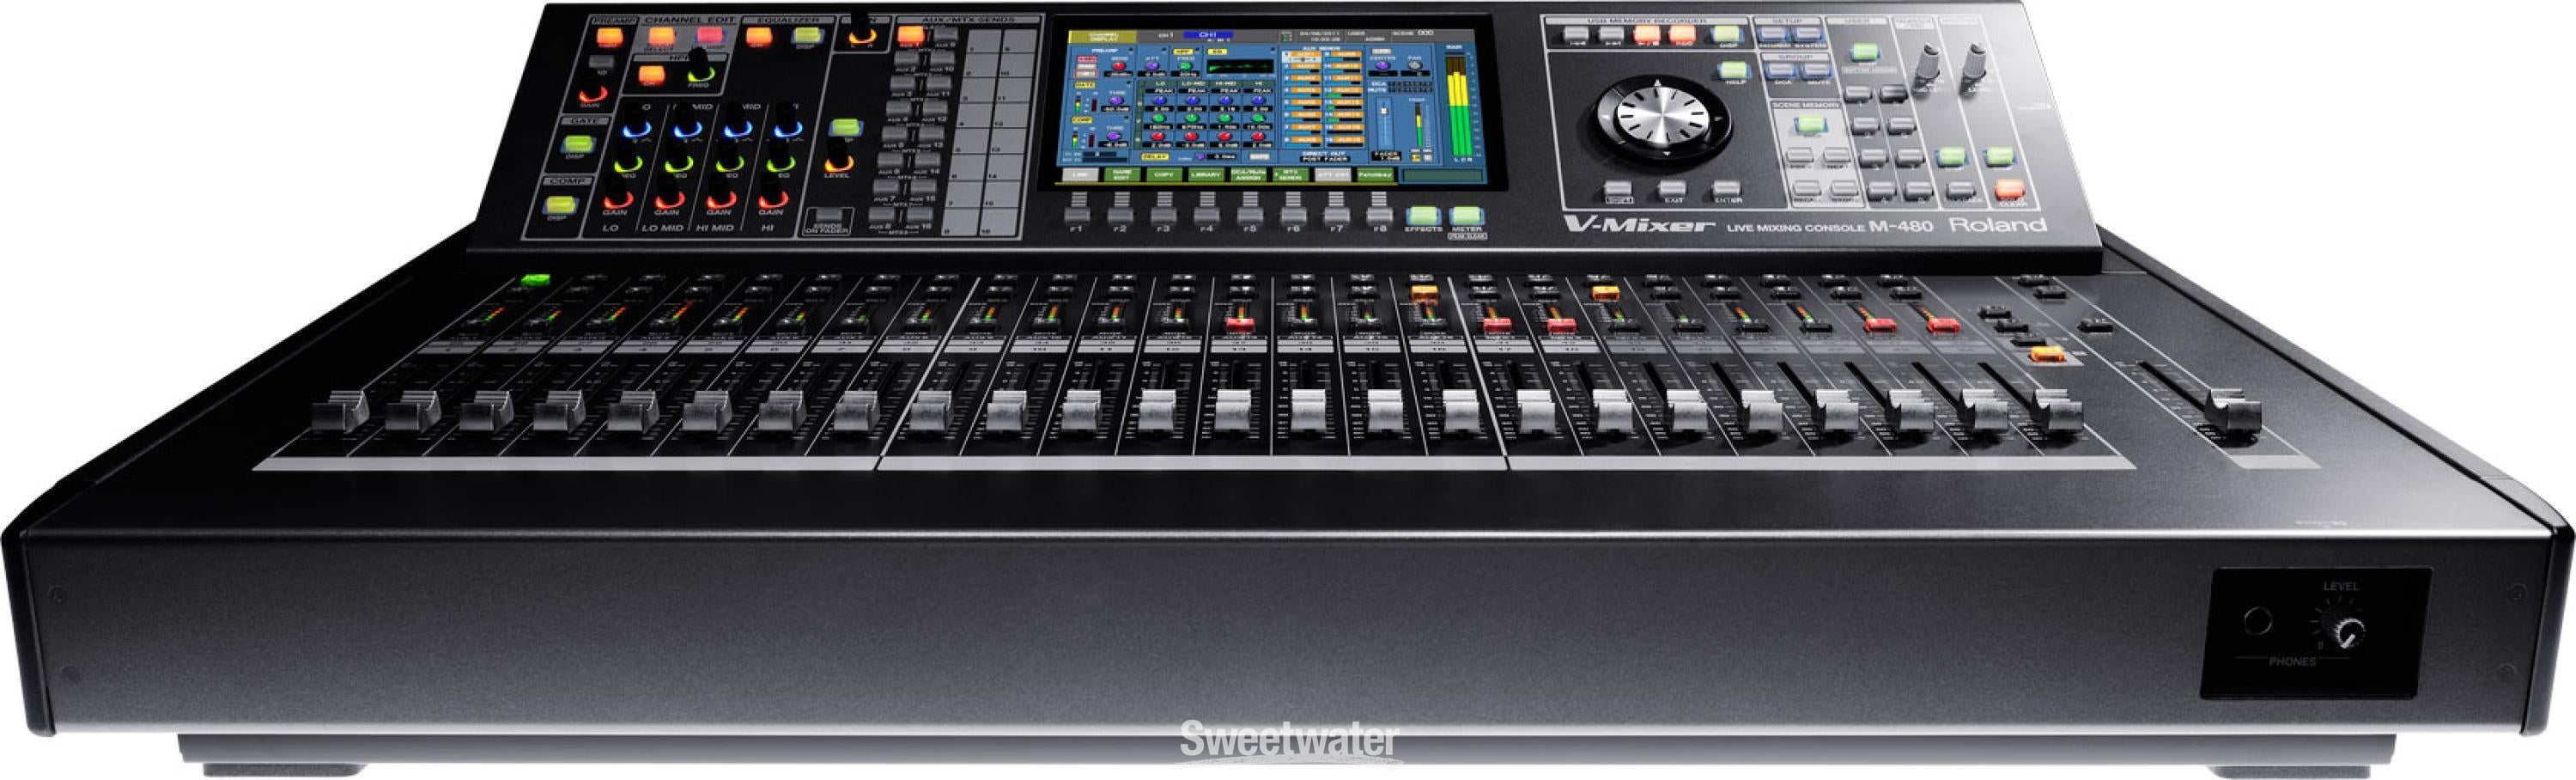 Roland M-480 | Sweetwater